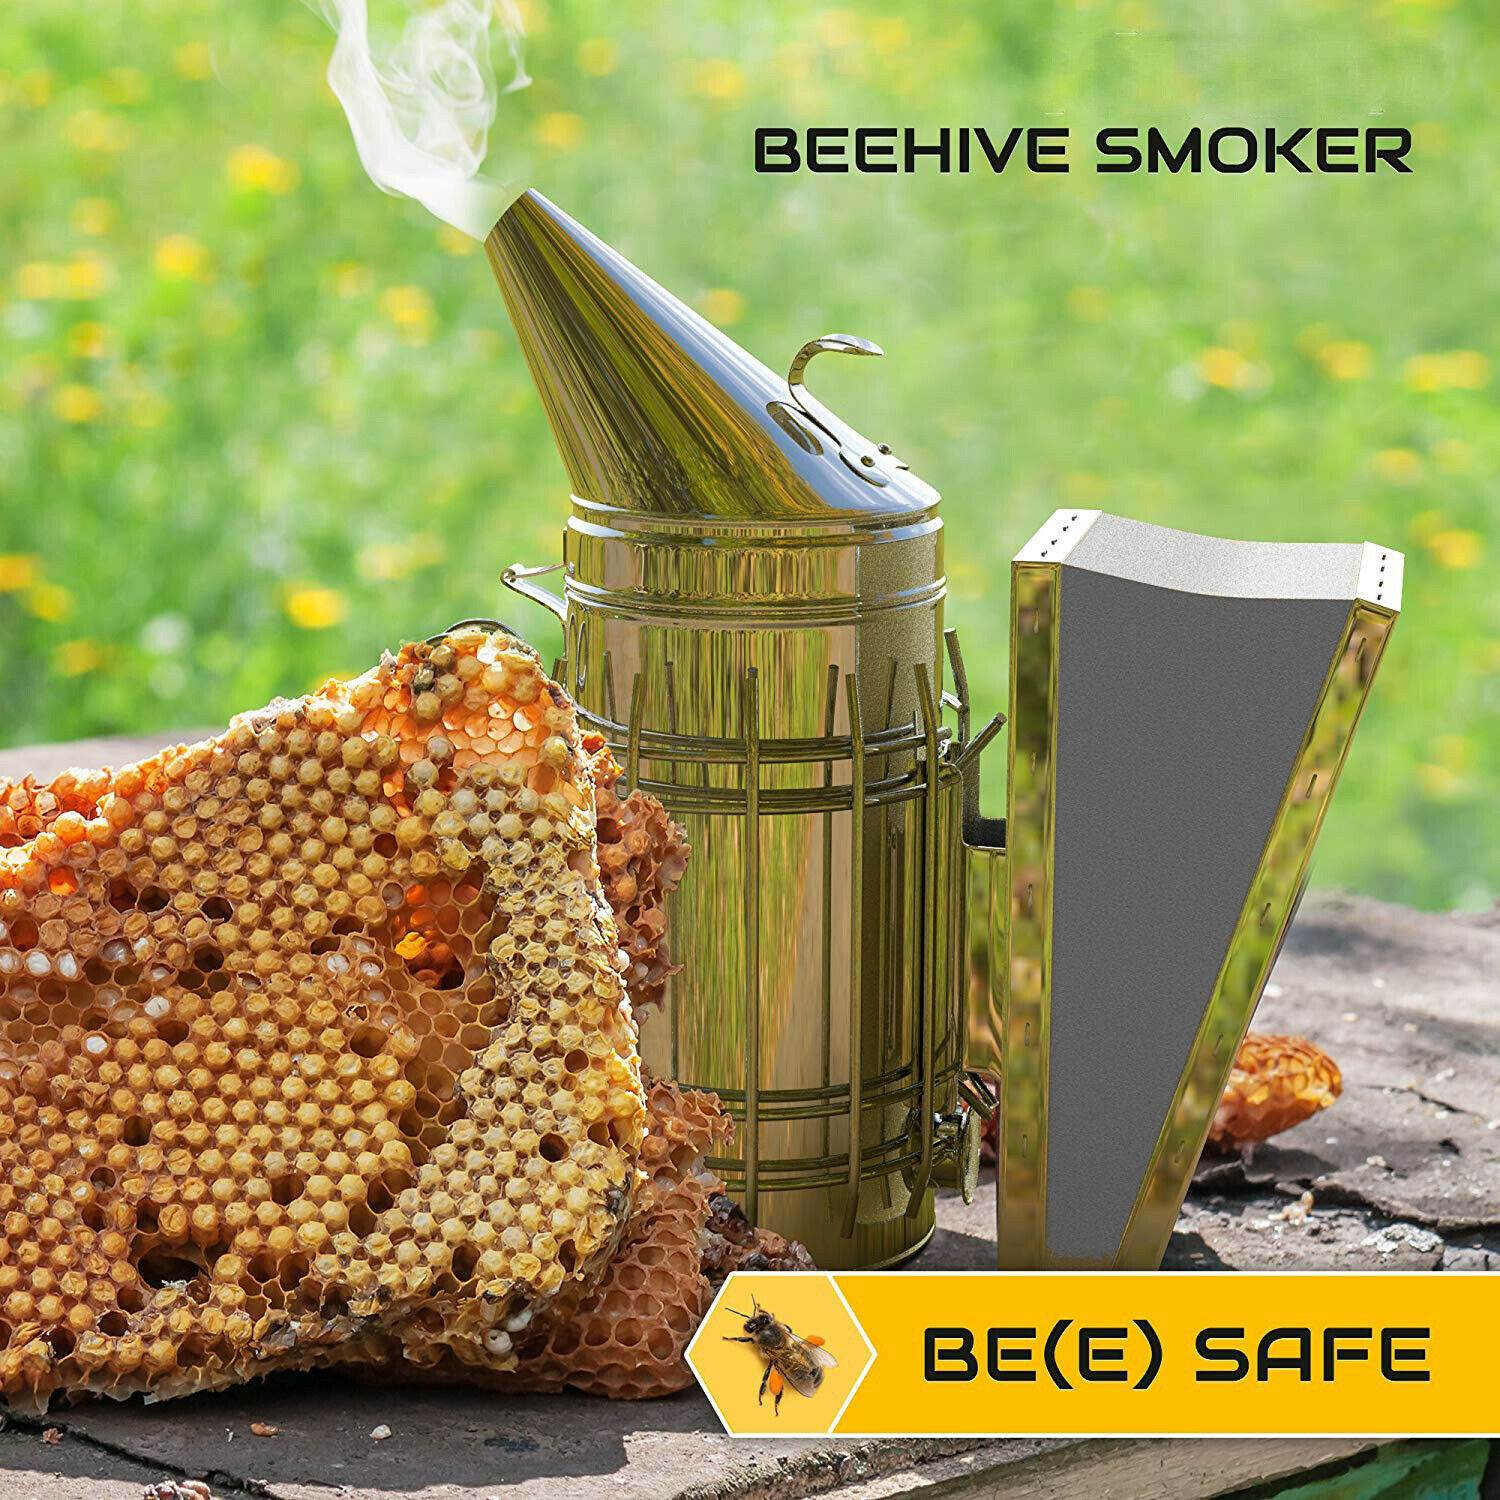 Details about   Bee Hive Smoker Stainless Steel with Heat Shield Calming Beekeeping Equipment 